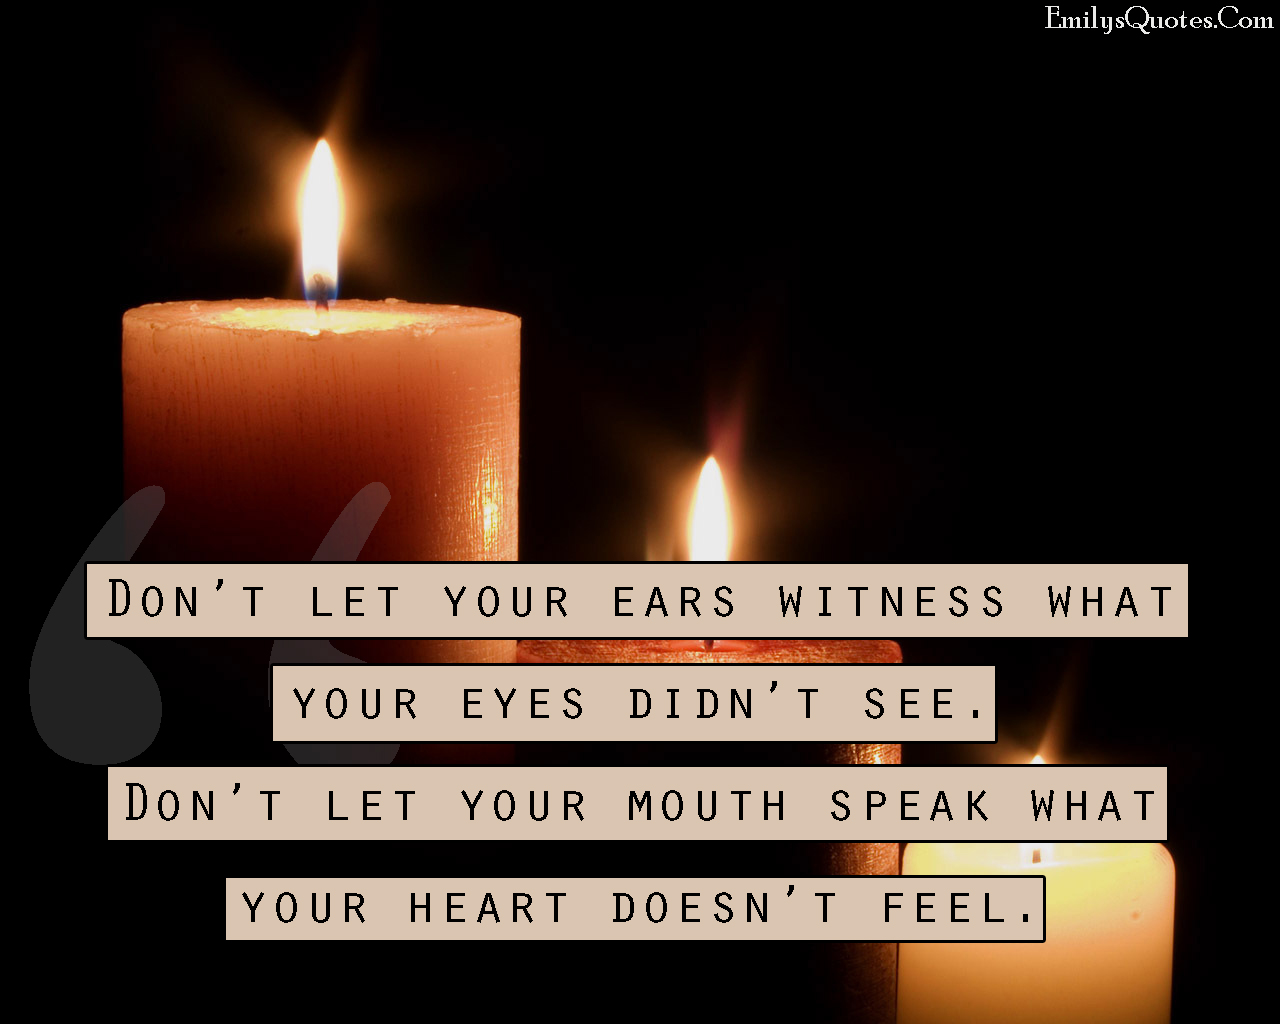 Don’t let your ears witness what your eyes didn’t see. Don’t let your mouth speak what your heart doesn’t feel